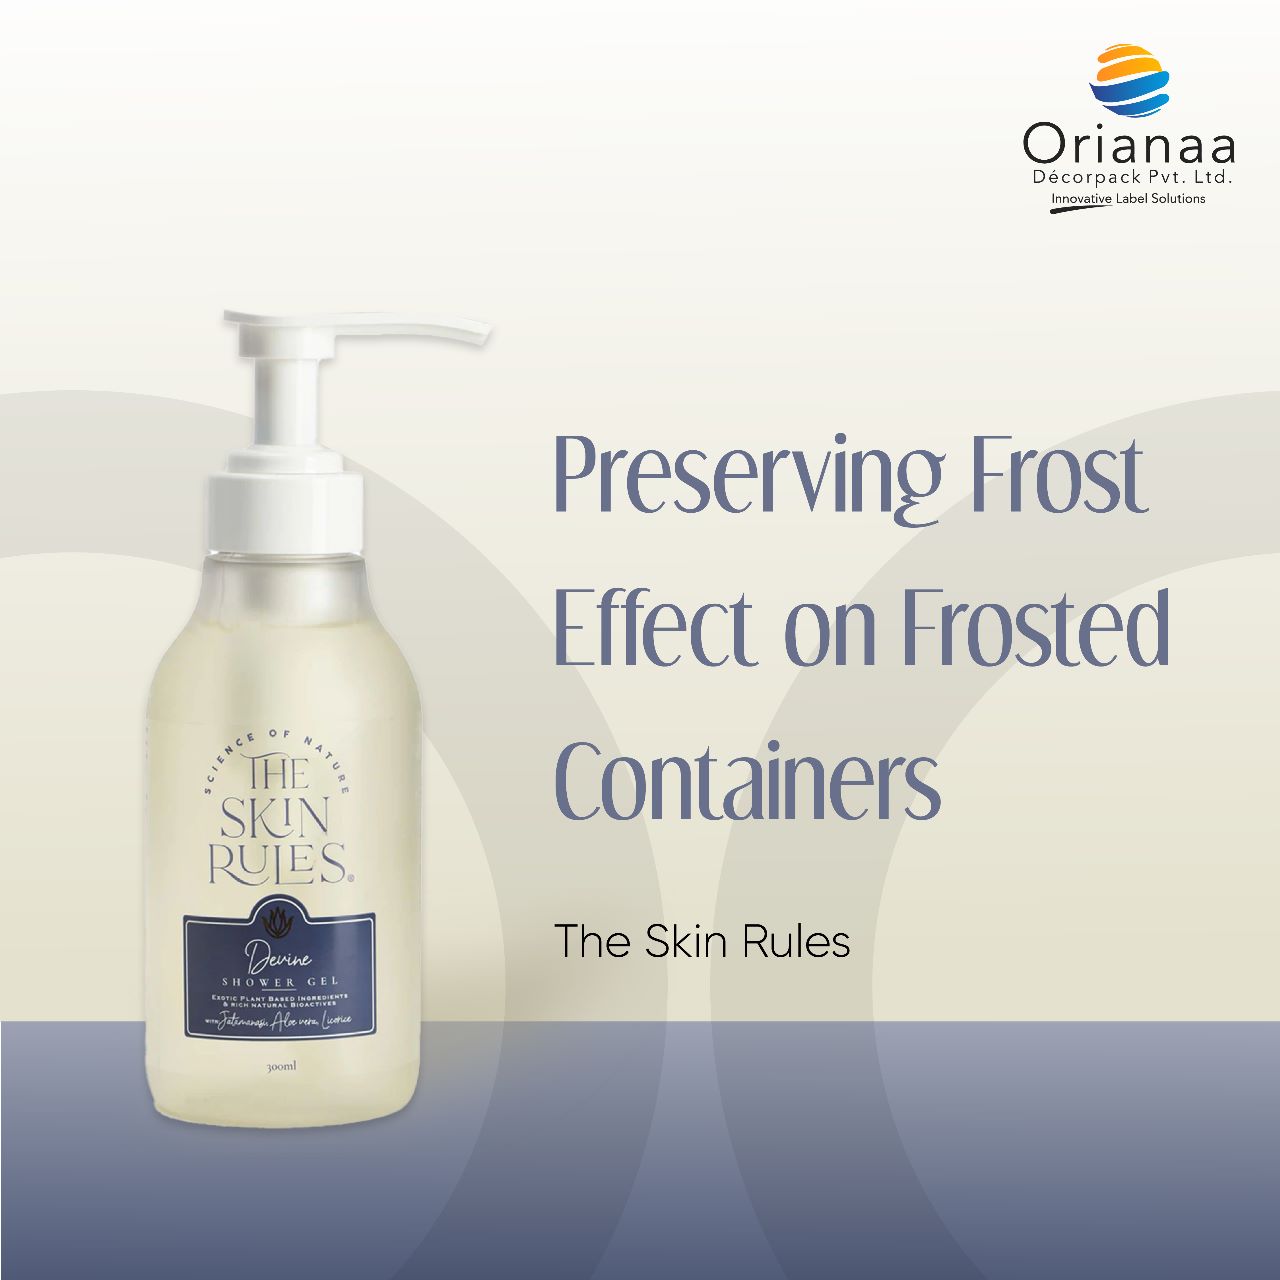 Keep Your Frosted Containers Frosty with our Sticker Labels - Preserving Frost Effect Guaranteed!